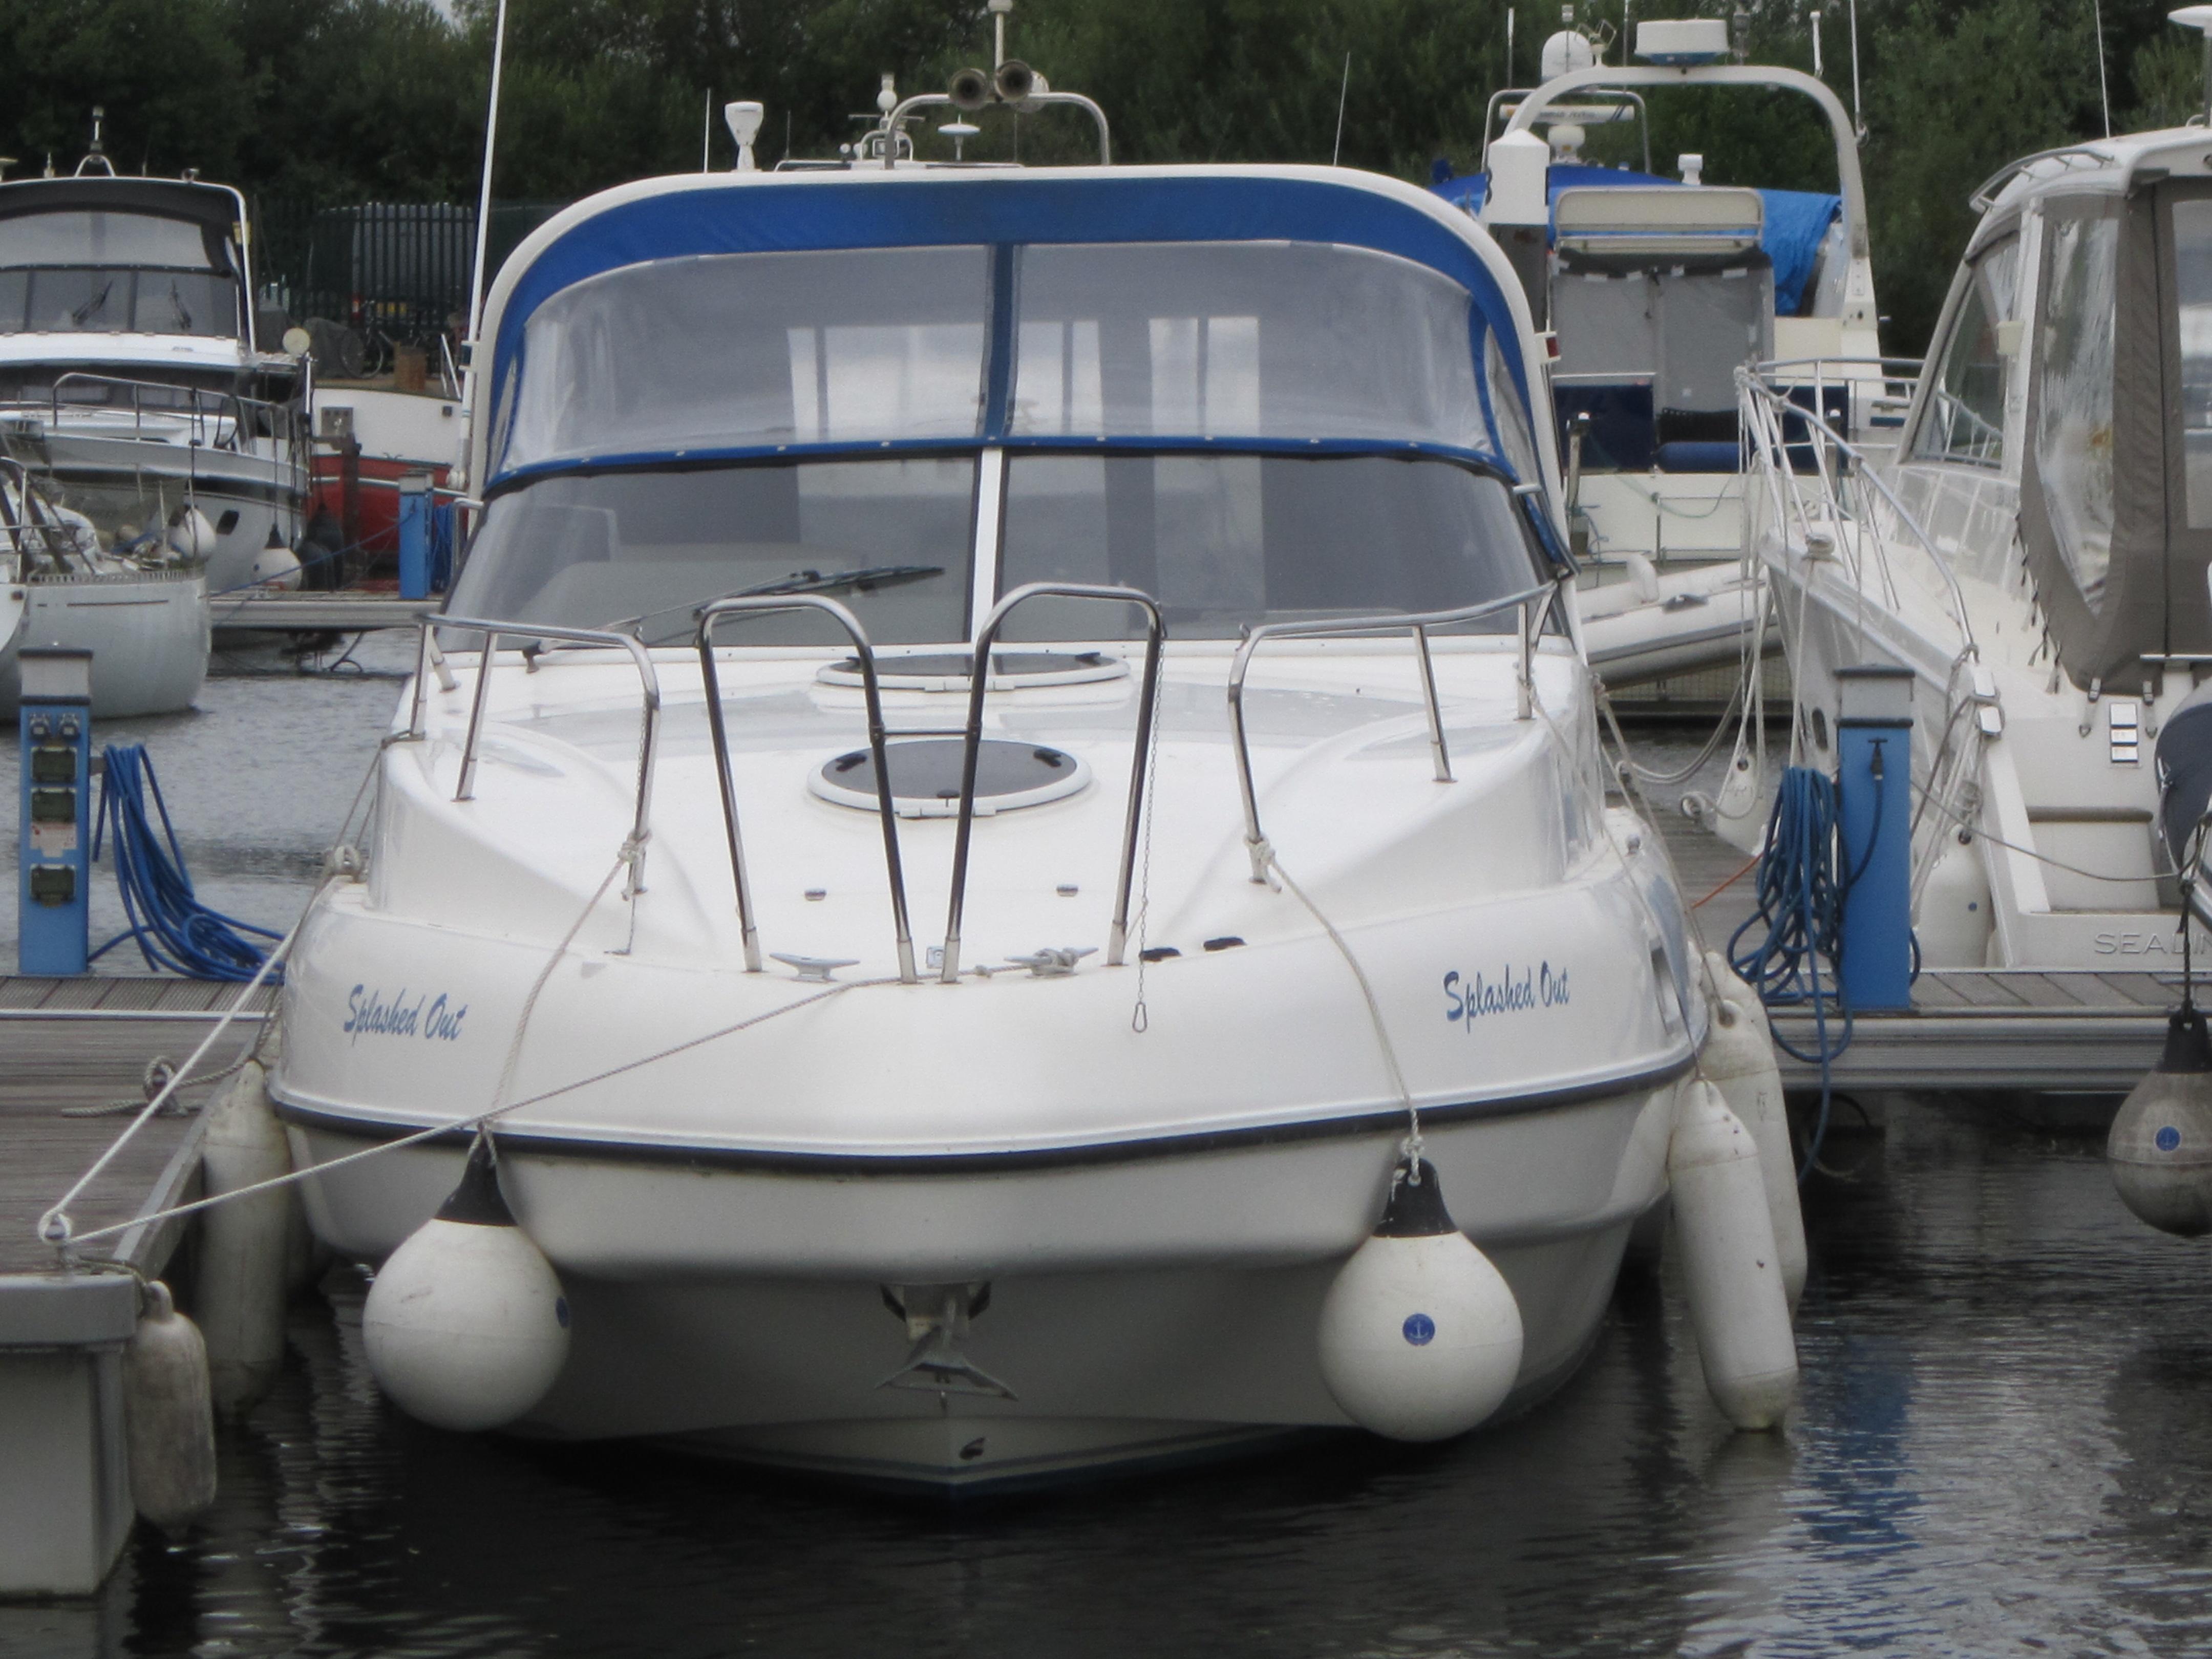 Discovery Sunline 31, Thames & Kennet Marina, Berkshire